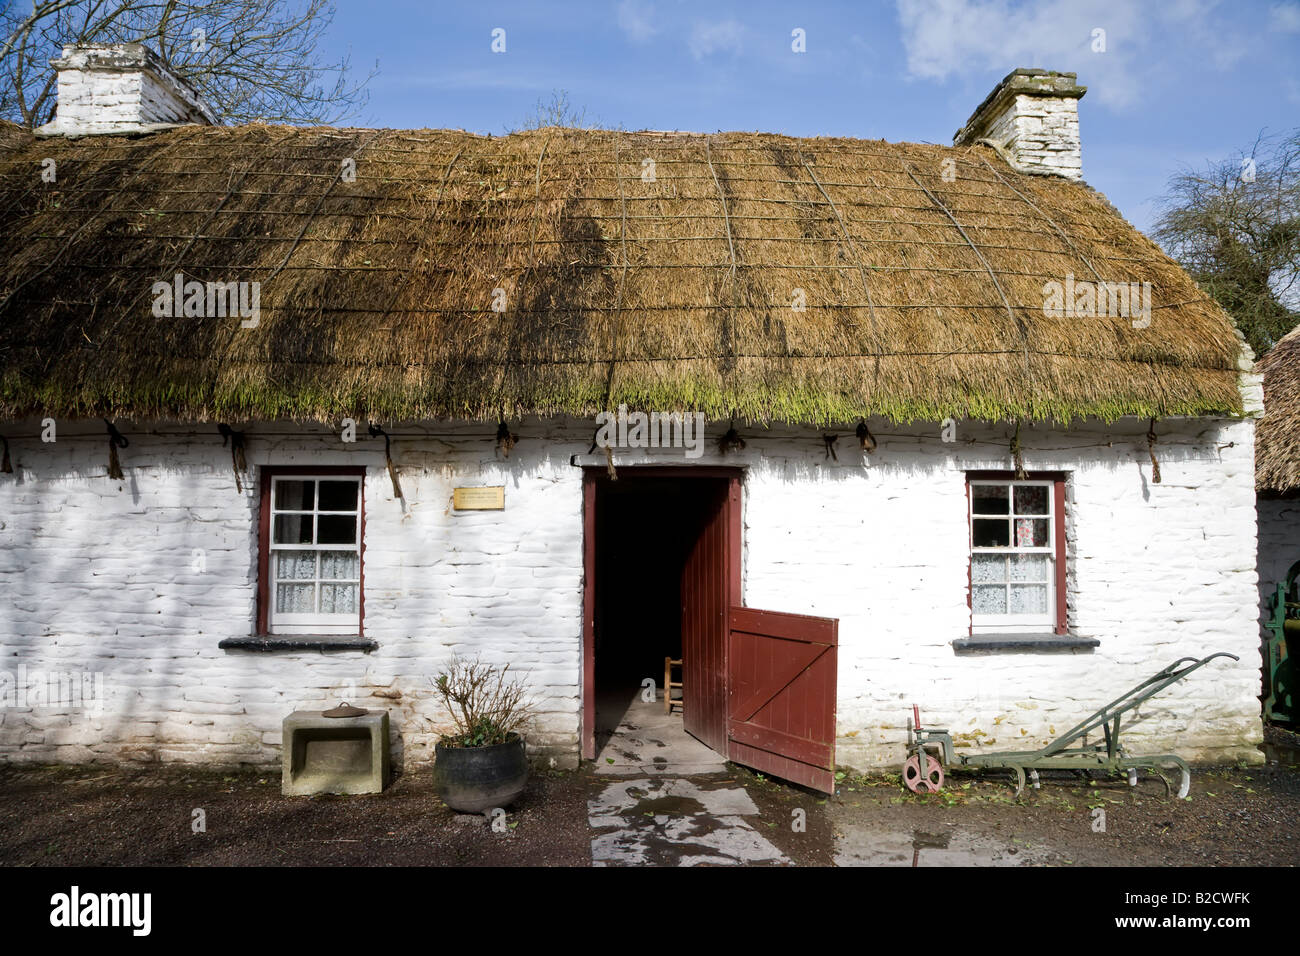 Irish Cottage with thatched roof at Bunratty Folk Park, County Clare, Ireland Stock Photo